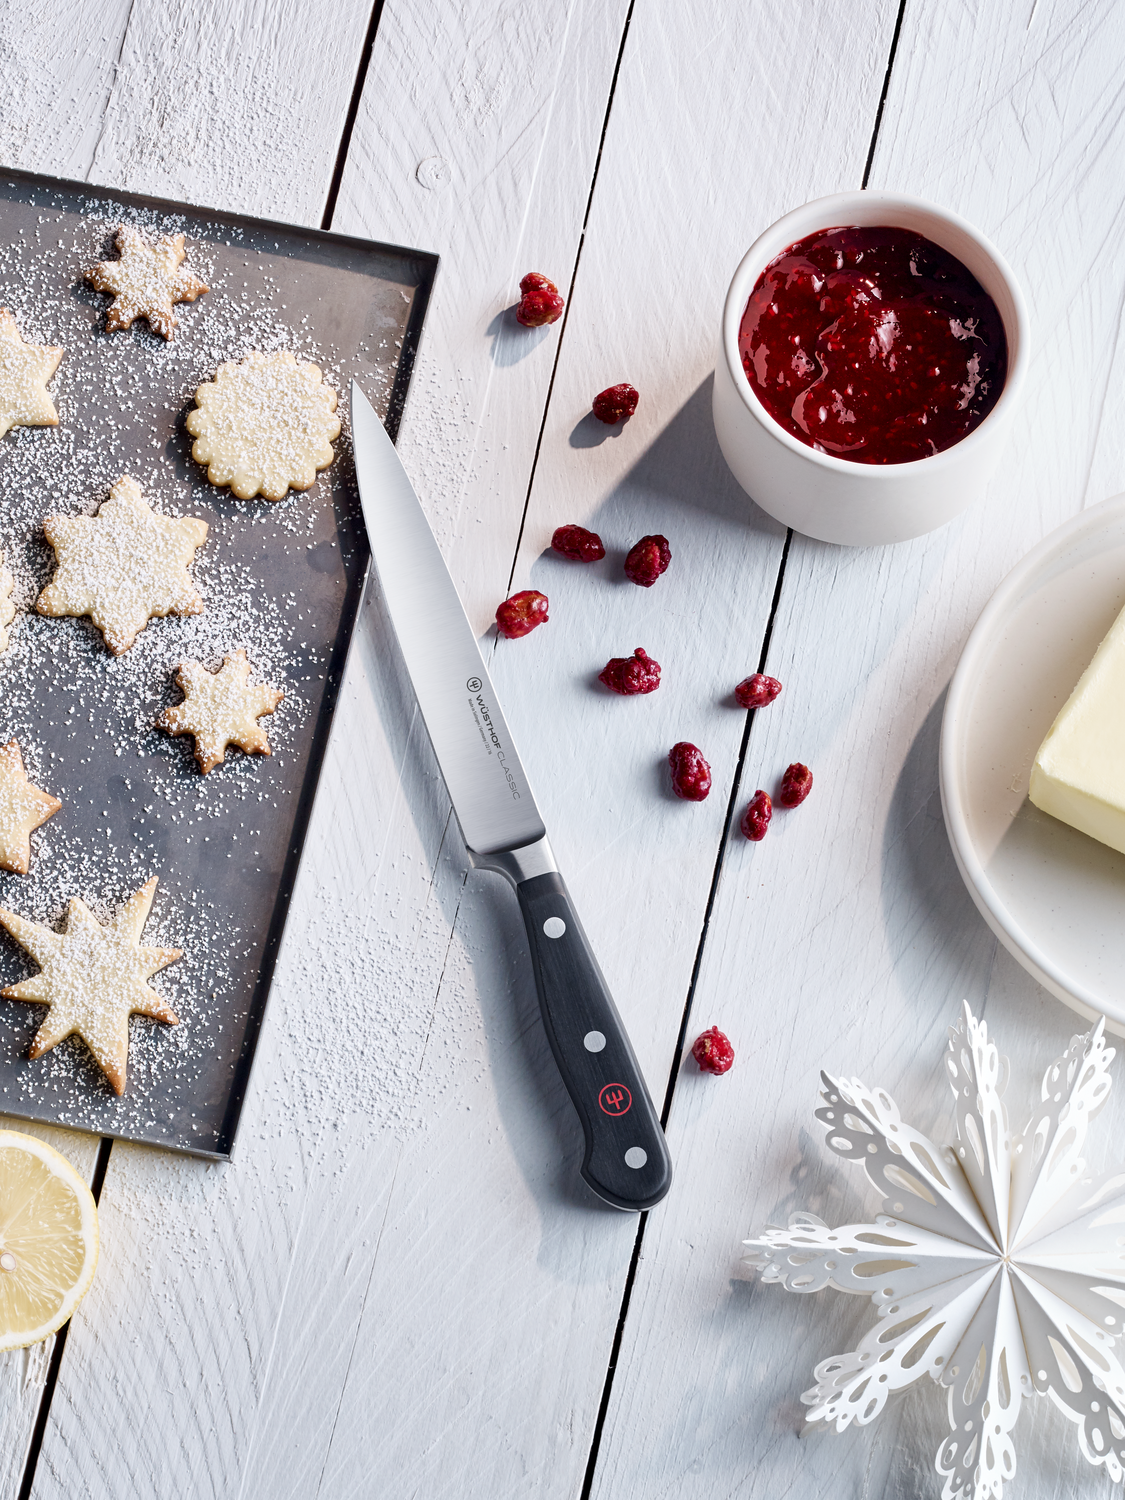 WÜSTHOF Classic Utility Knife with holiday cookies and jam